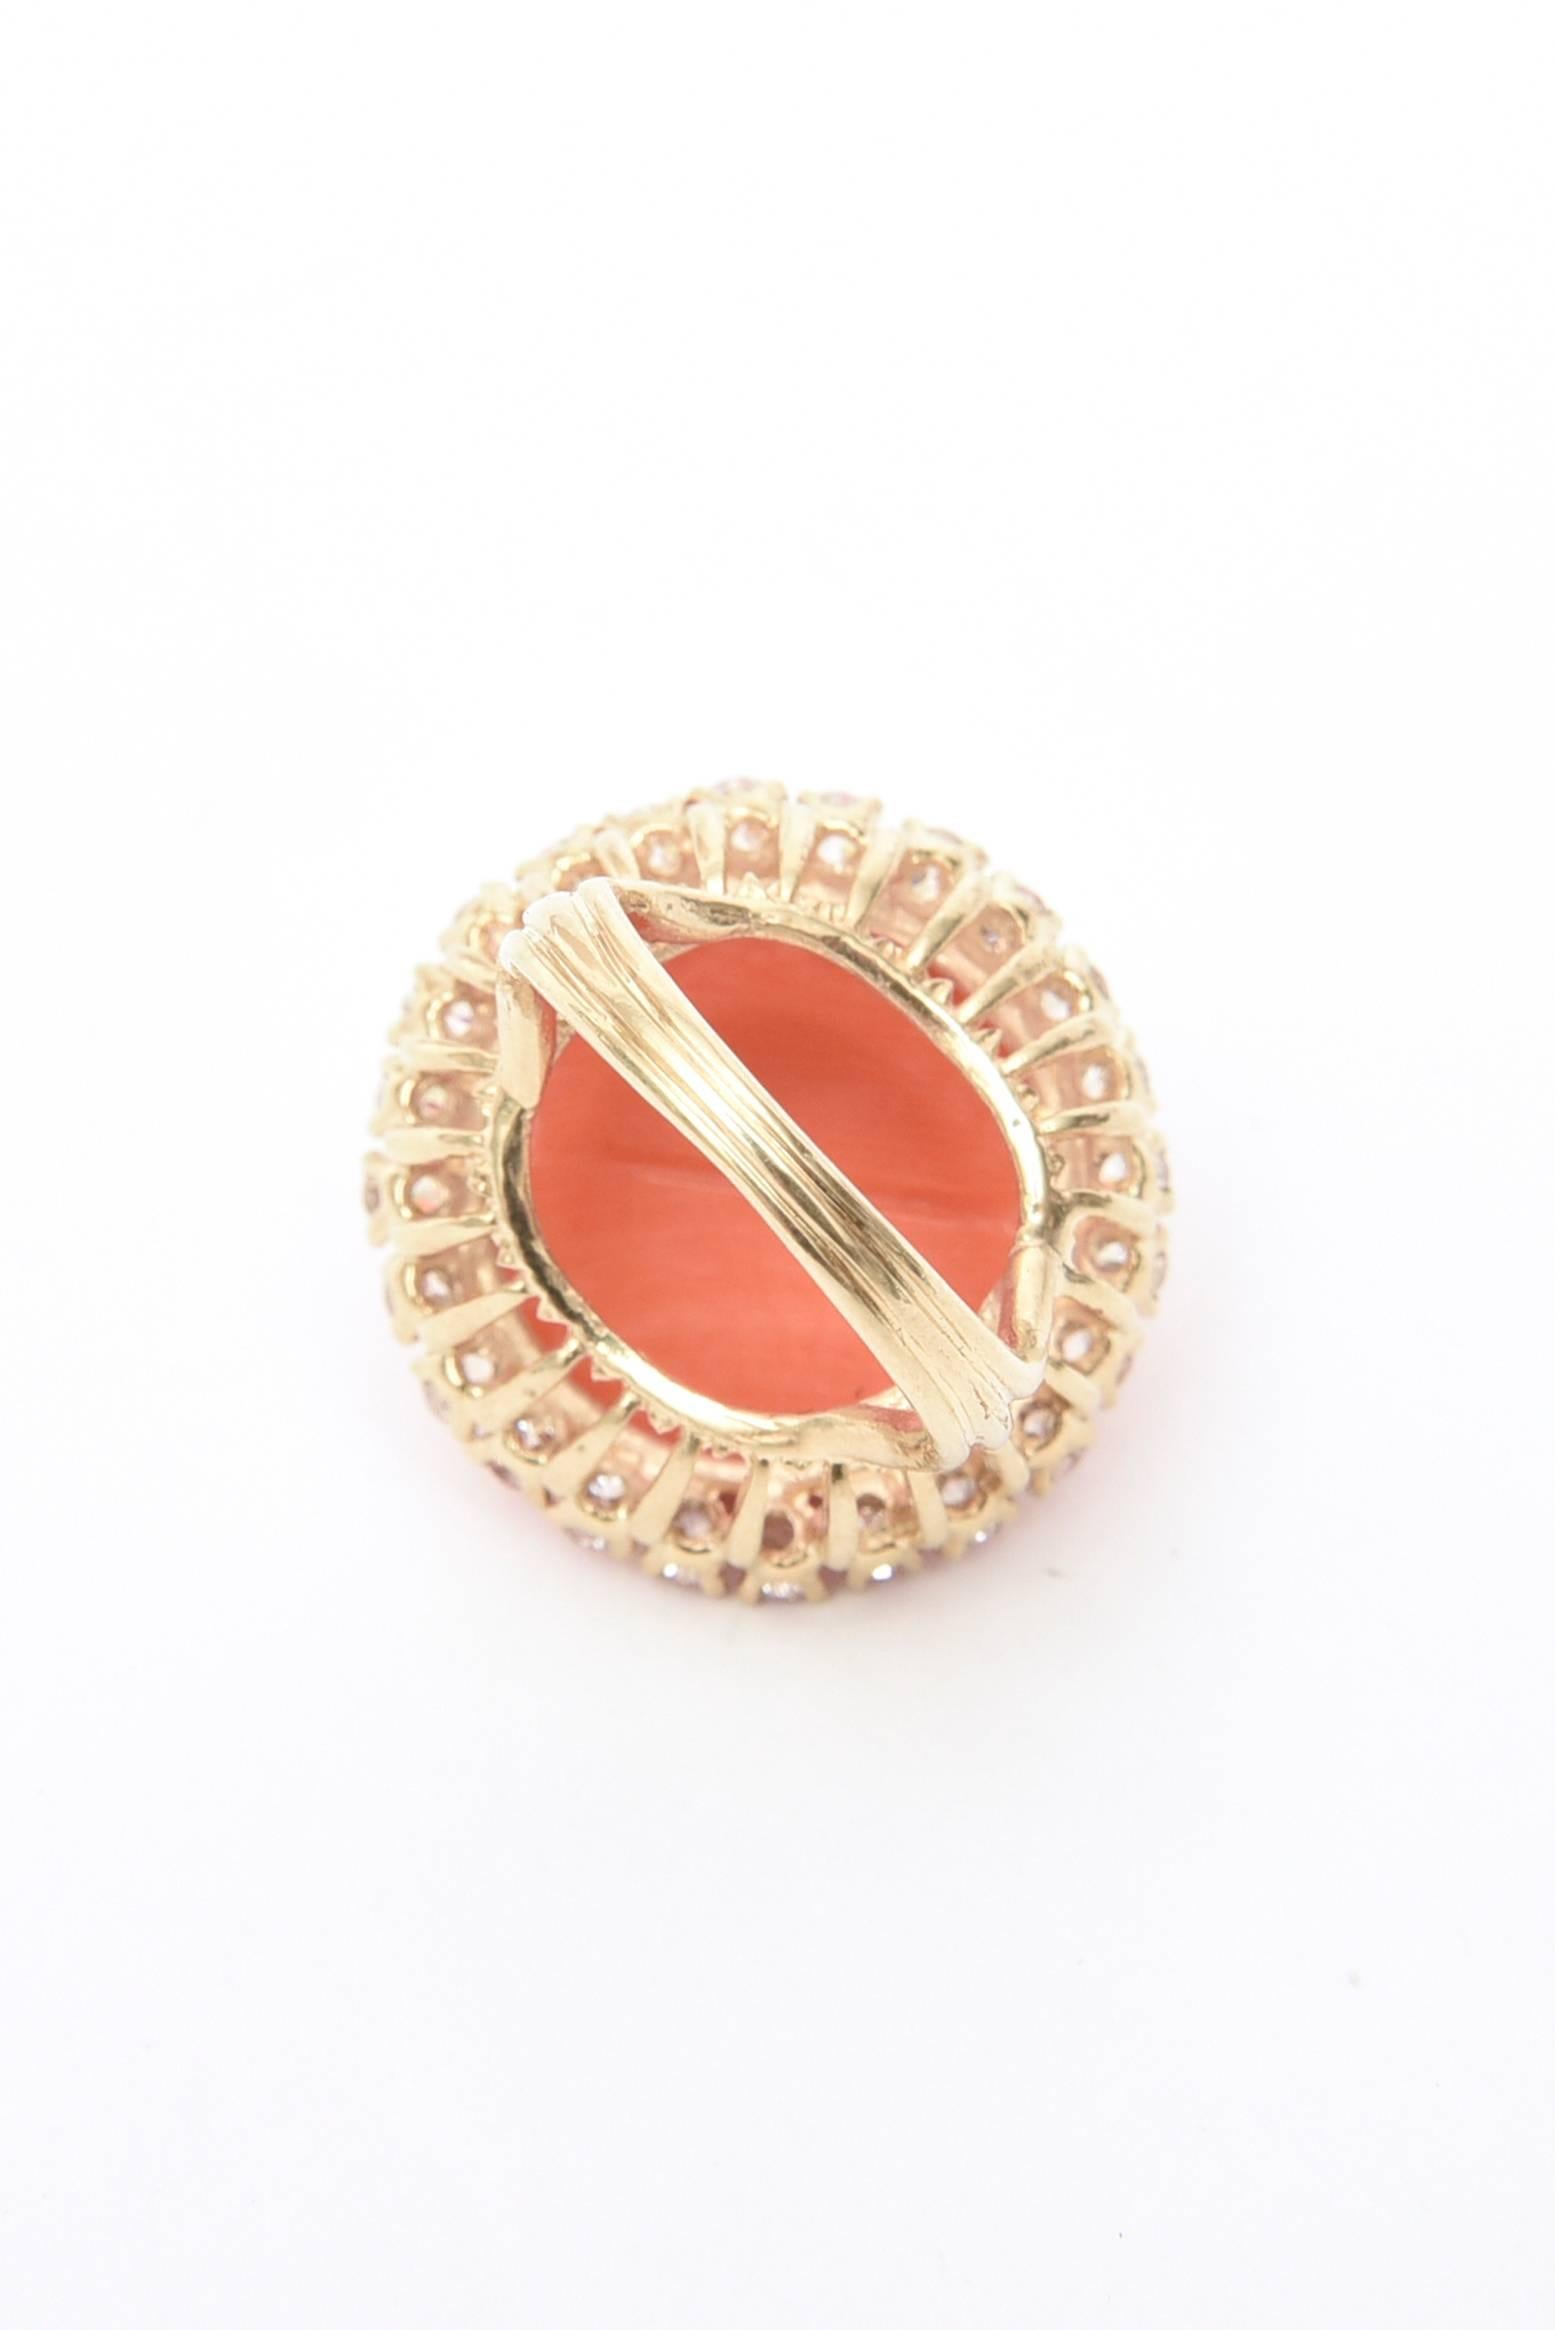  Stunning Vintage Coral, Diamond and 14 Karat Yellow Gold Dome Cocktail Ring 2